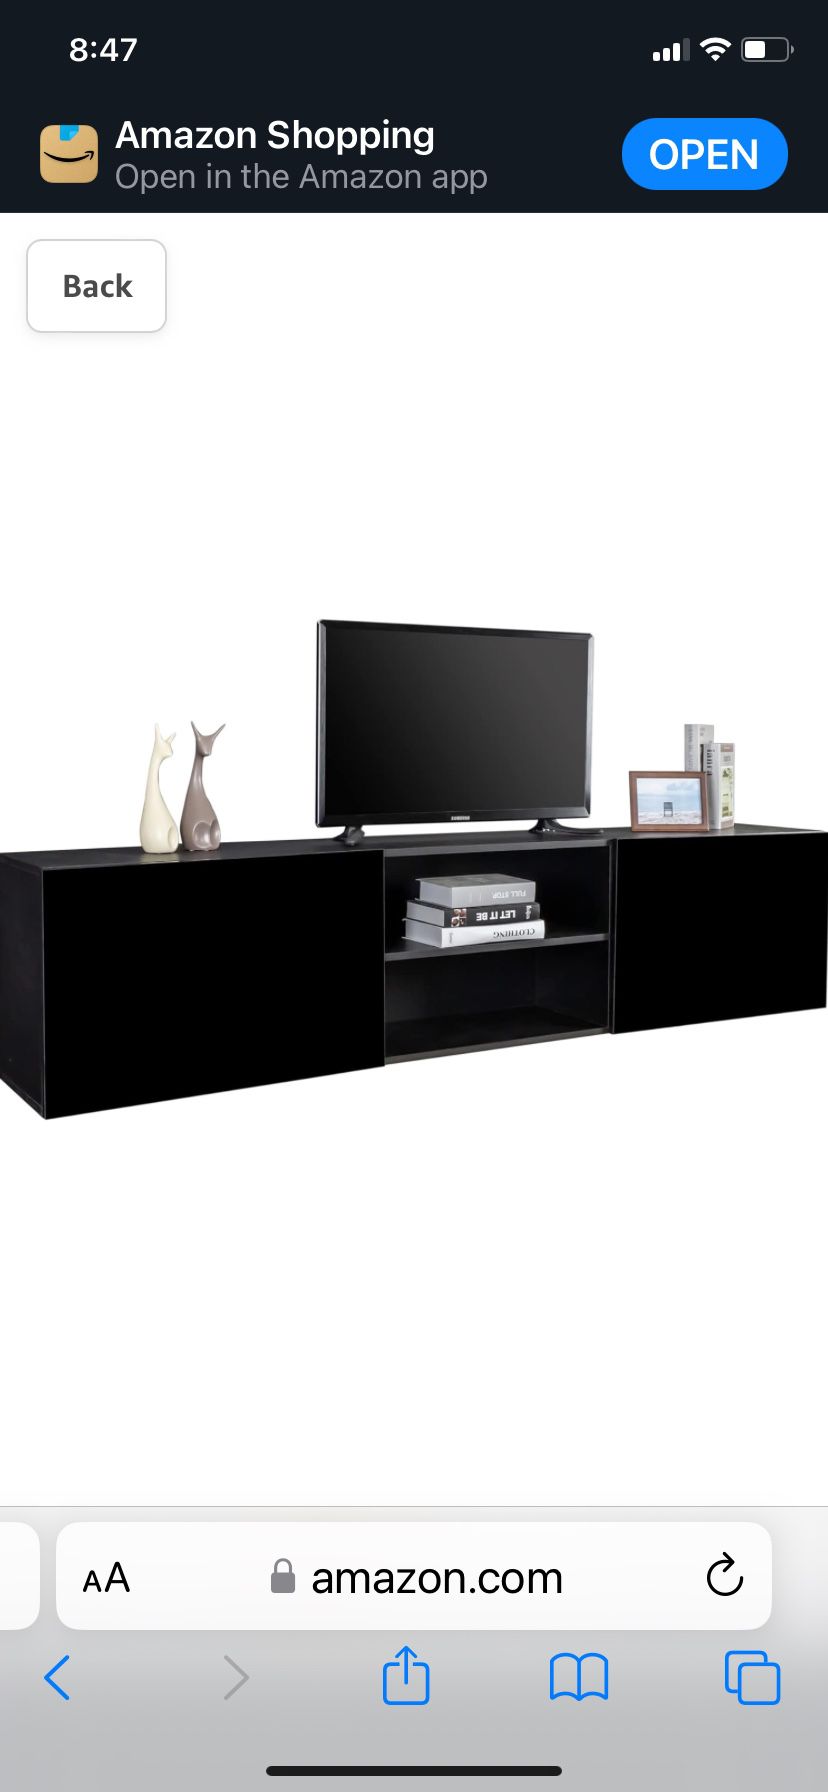 TV Stand Wall Mount